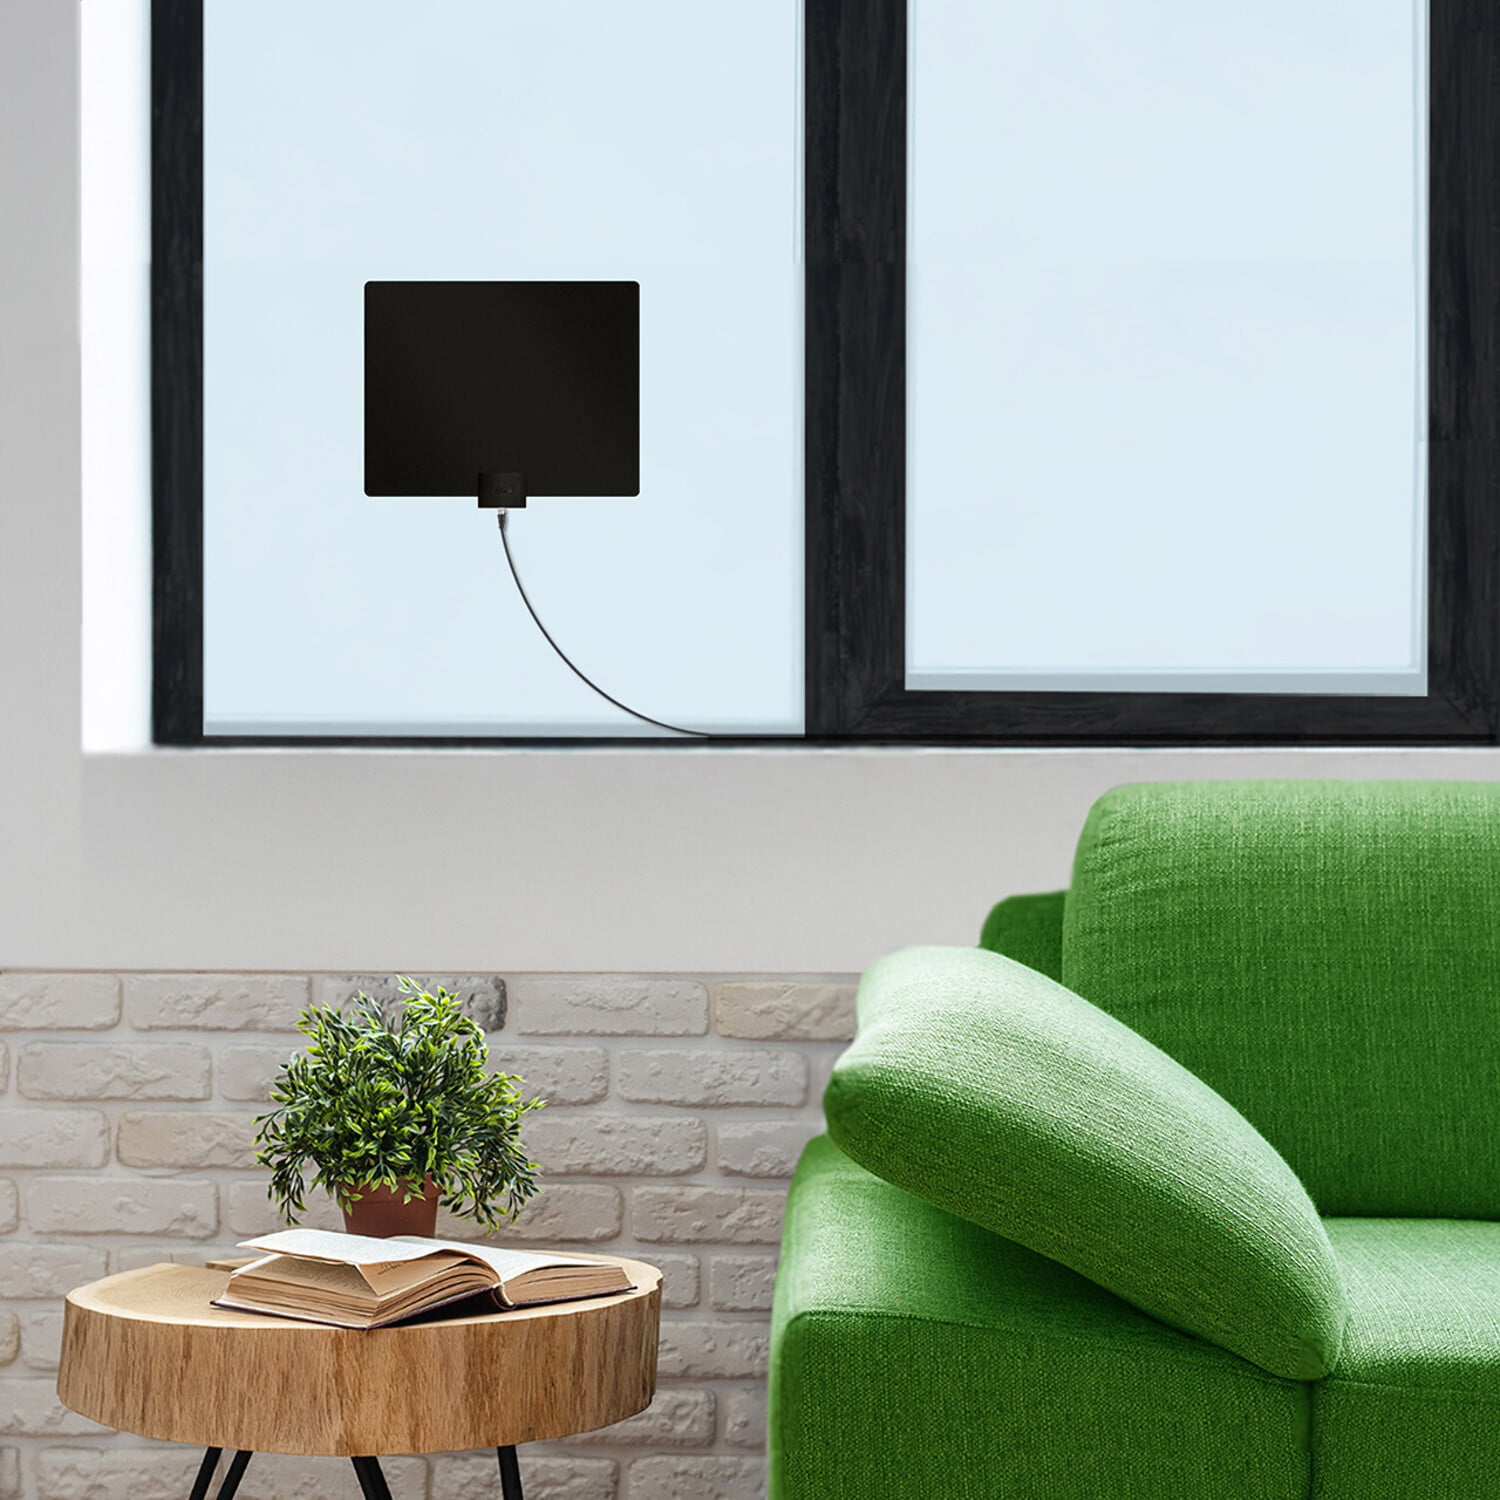 Mohu Leaf 50 Amplified Indoor HDTV Antenna w/ Jolt Switch In-Line Amplifier and 12 Ft. Coaxial Cable - image 5 of 11